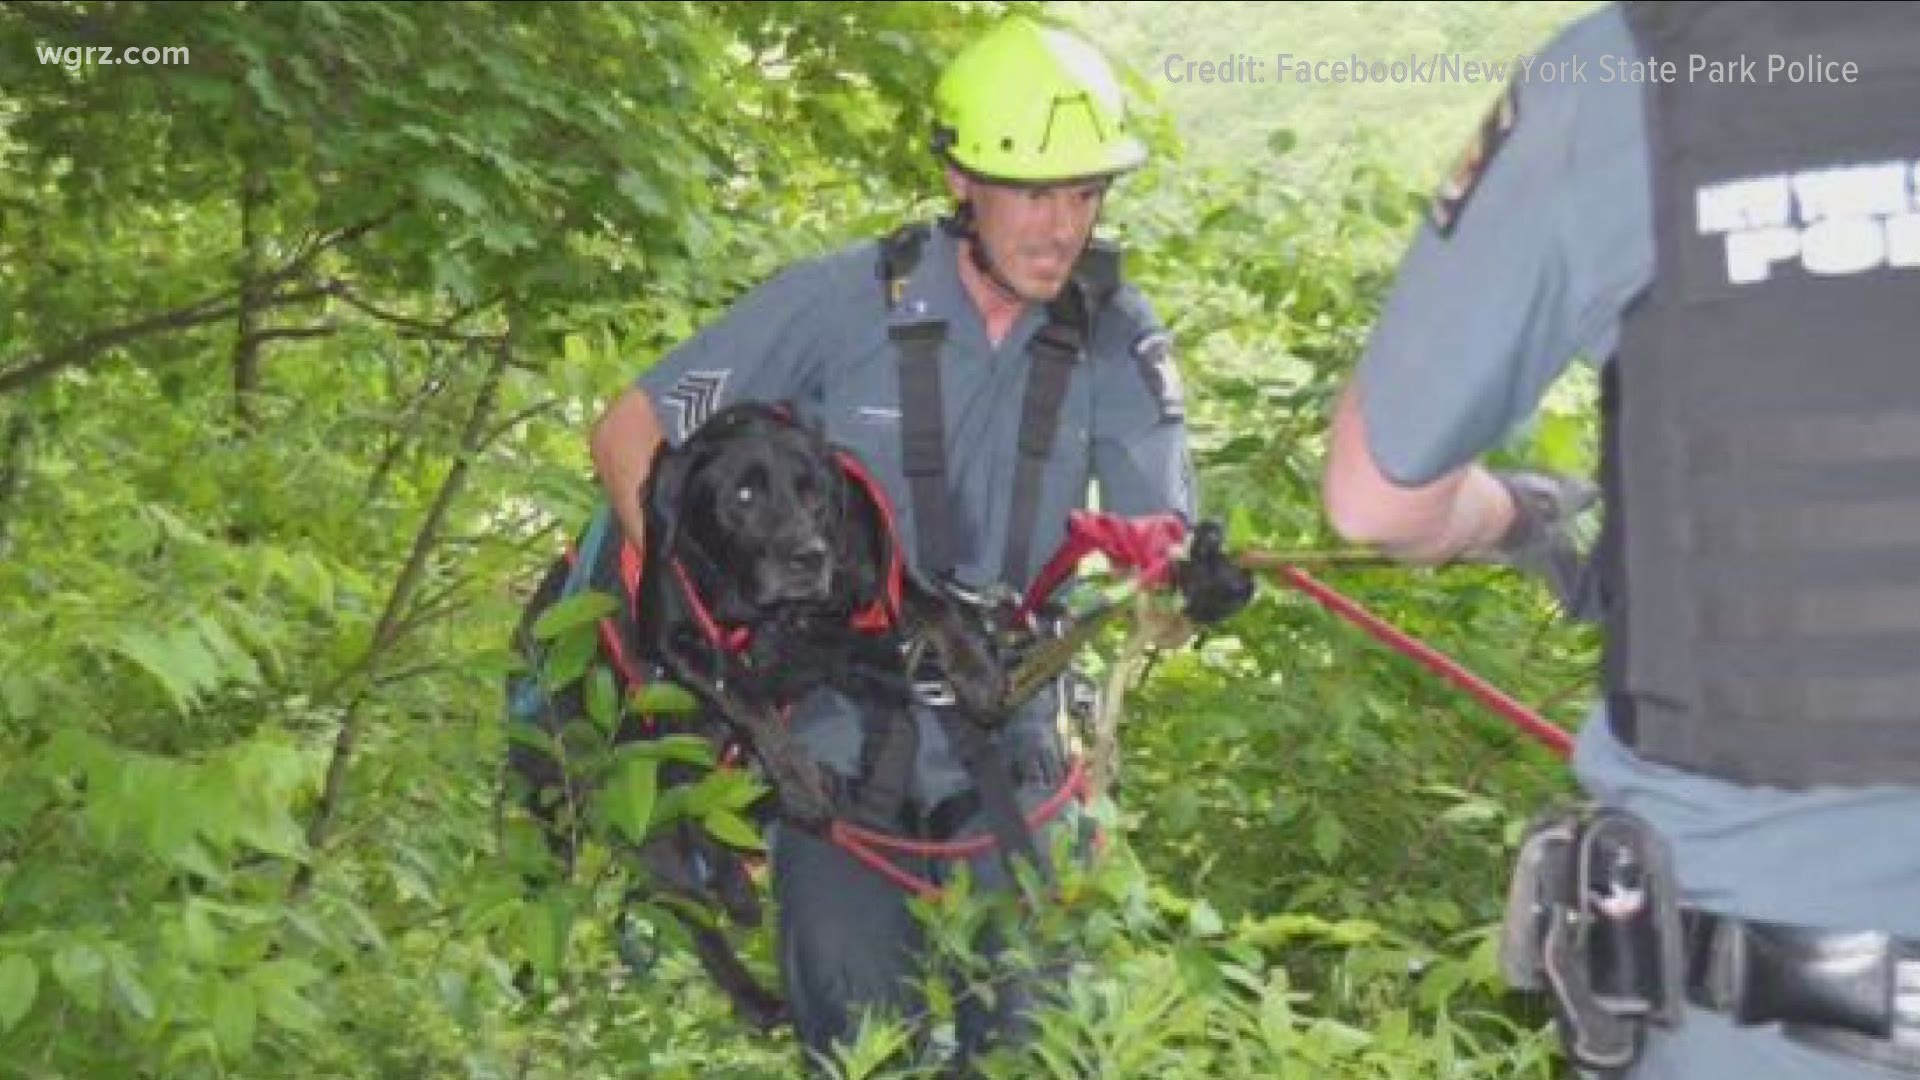 Achilles broke a rear leg during the fall but was okay otherwise. The Genesee High Angle Rope Rescue team was able to snag him and reunite him with his family.